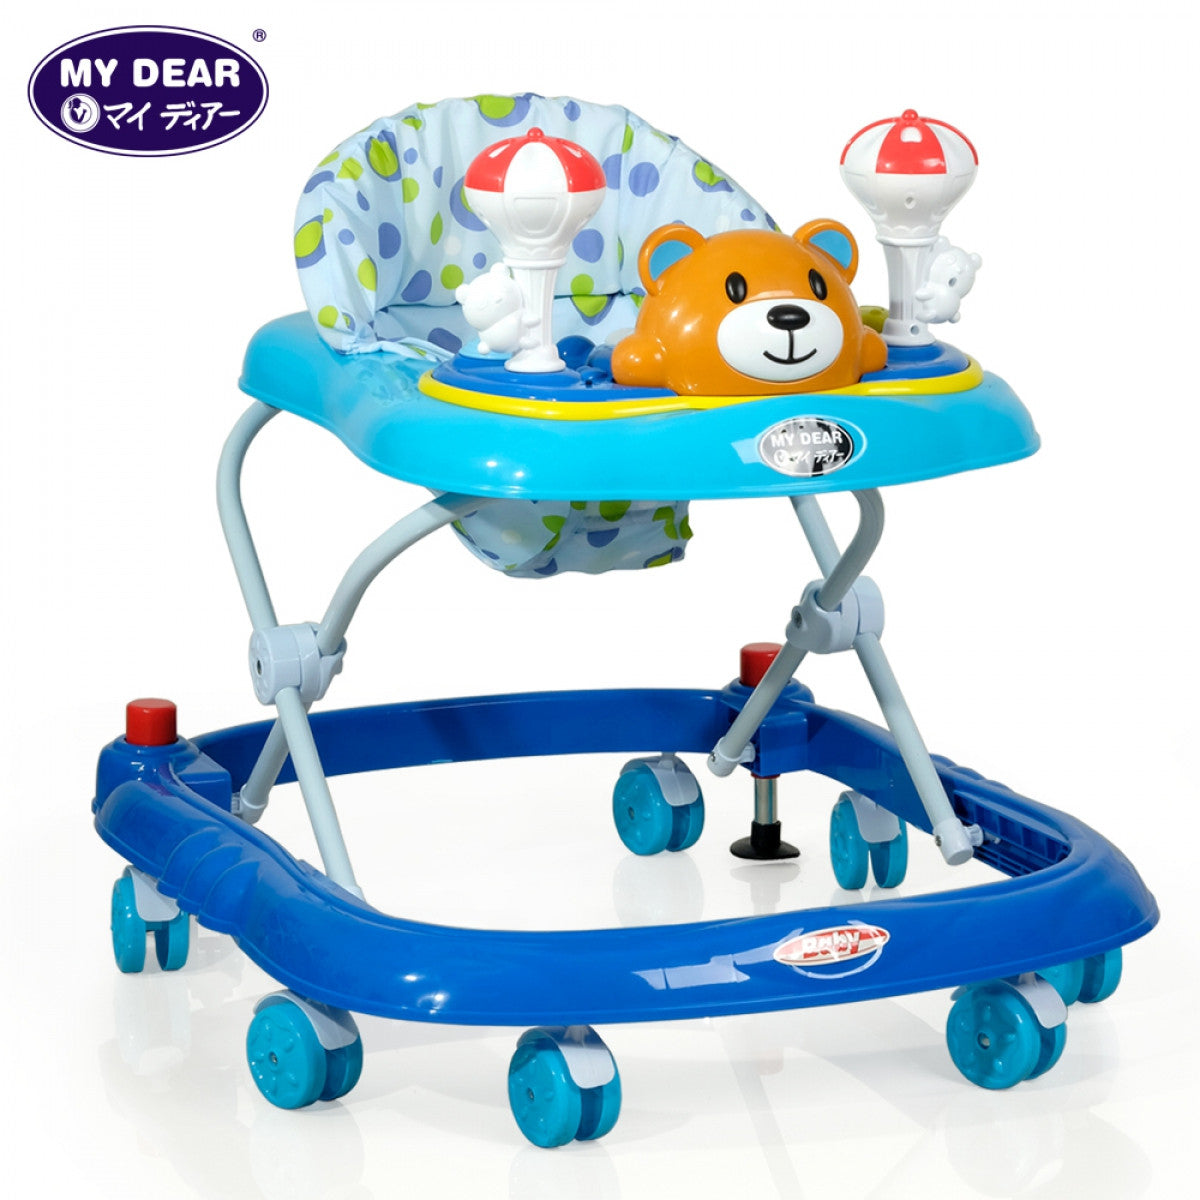 My Dear 20130 Baby Walker With Adjustable Heights, Stopper and Music Tray